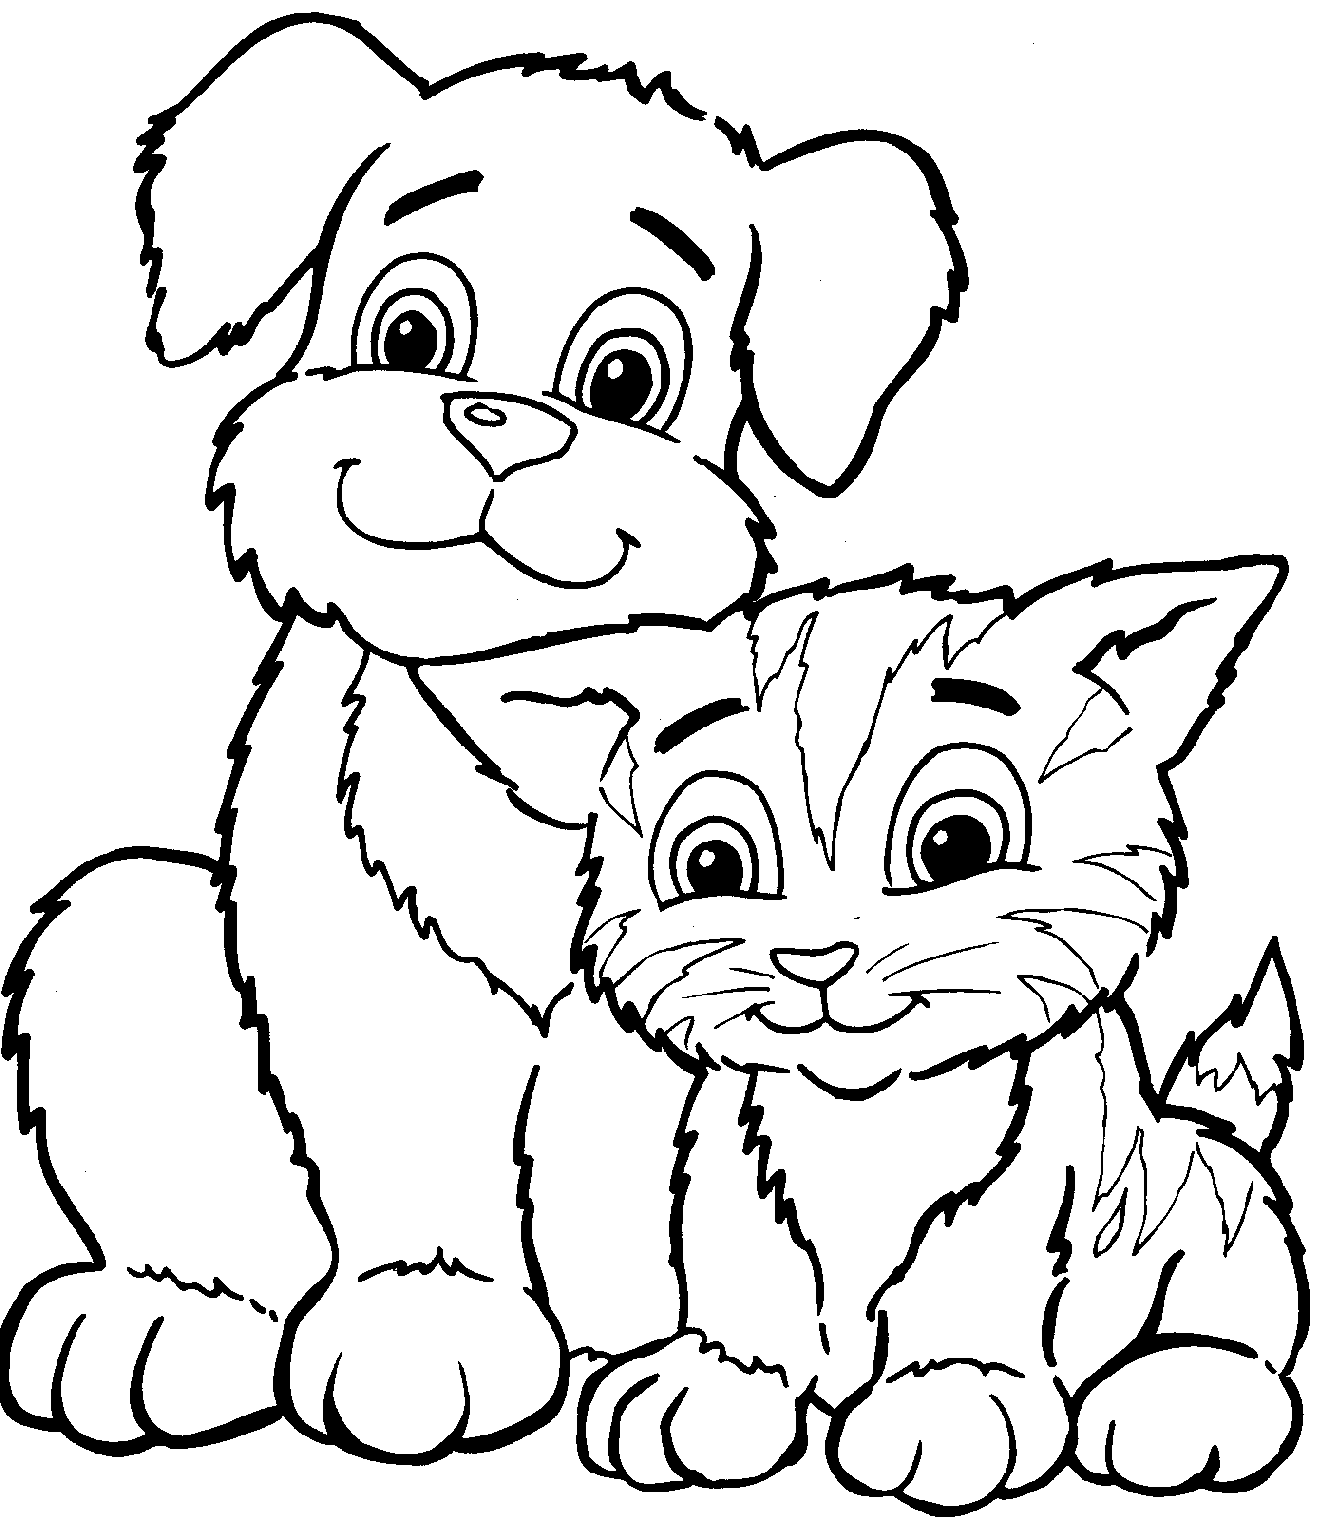 Coloring Pages Of Kittens And Puppies To Print - High Quality ...